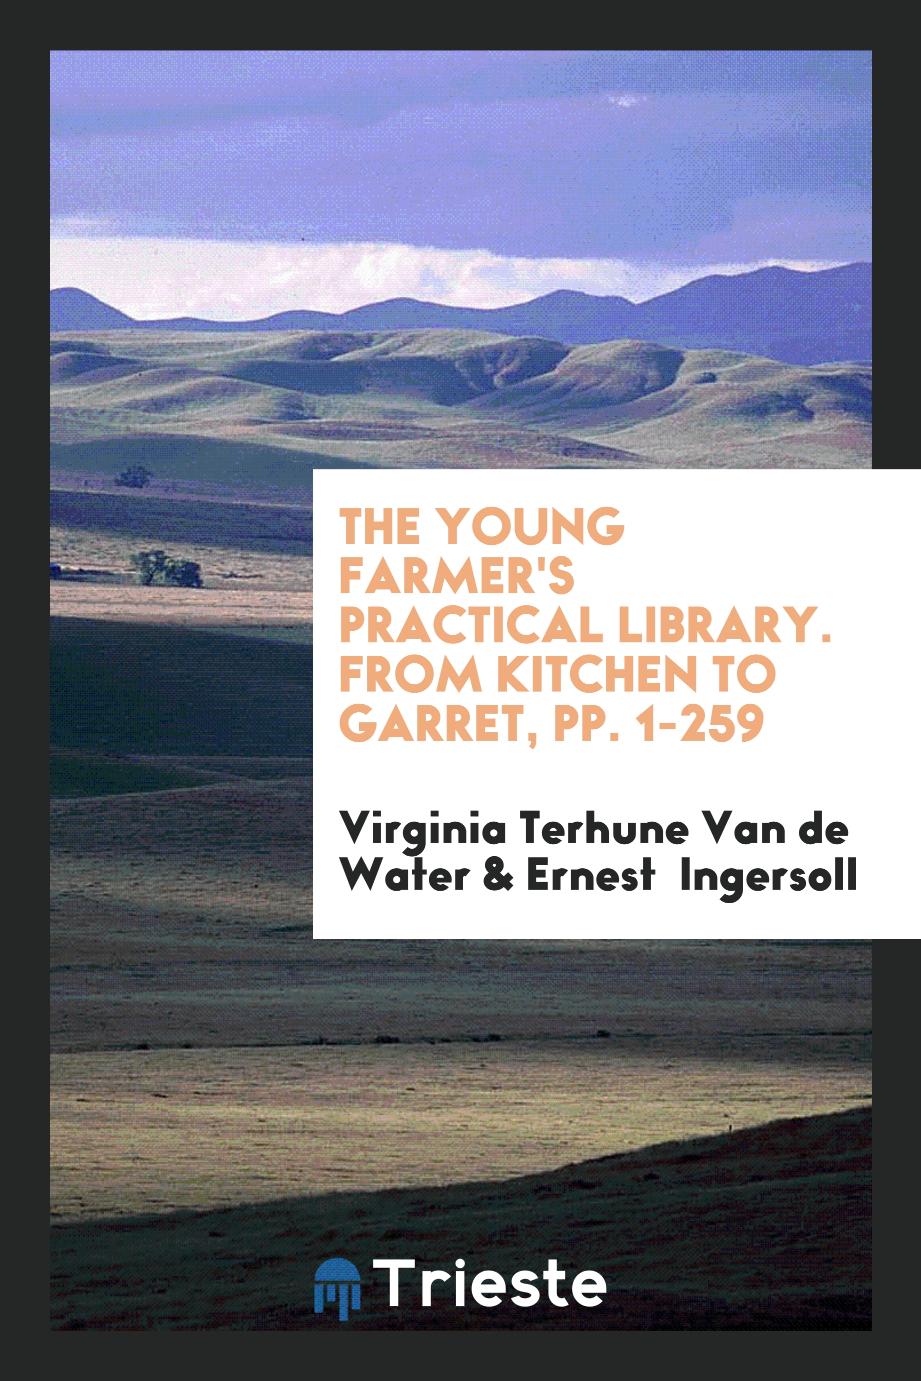 The Young Farmer's Practical Library. From Kitchen to Garret, pp. 1-259